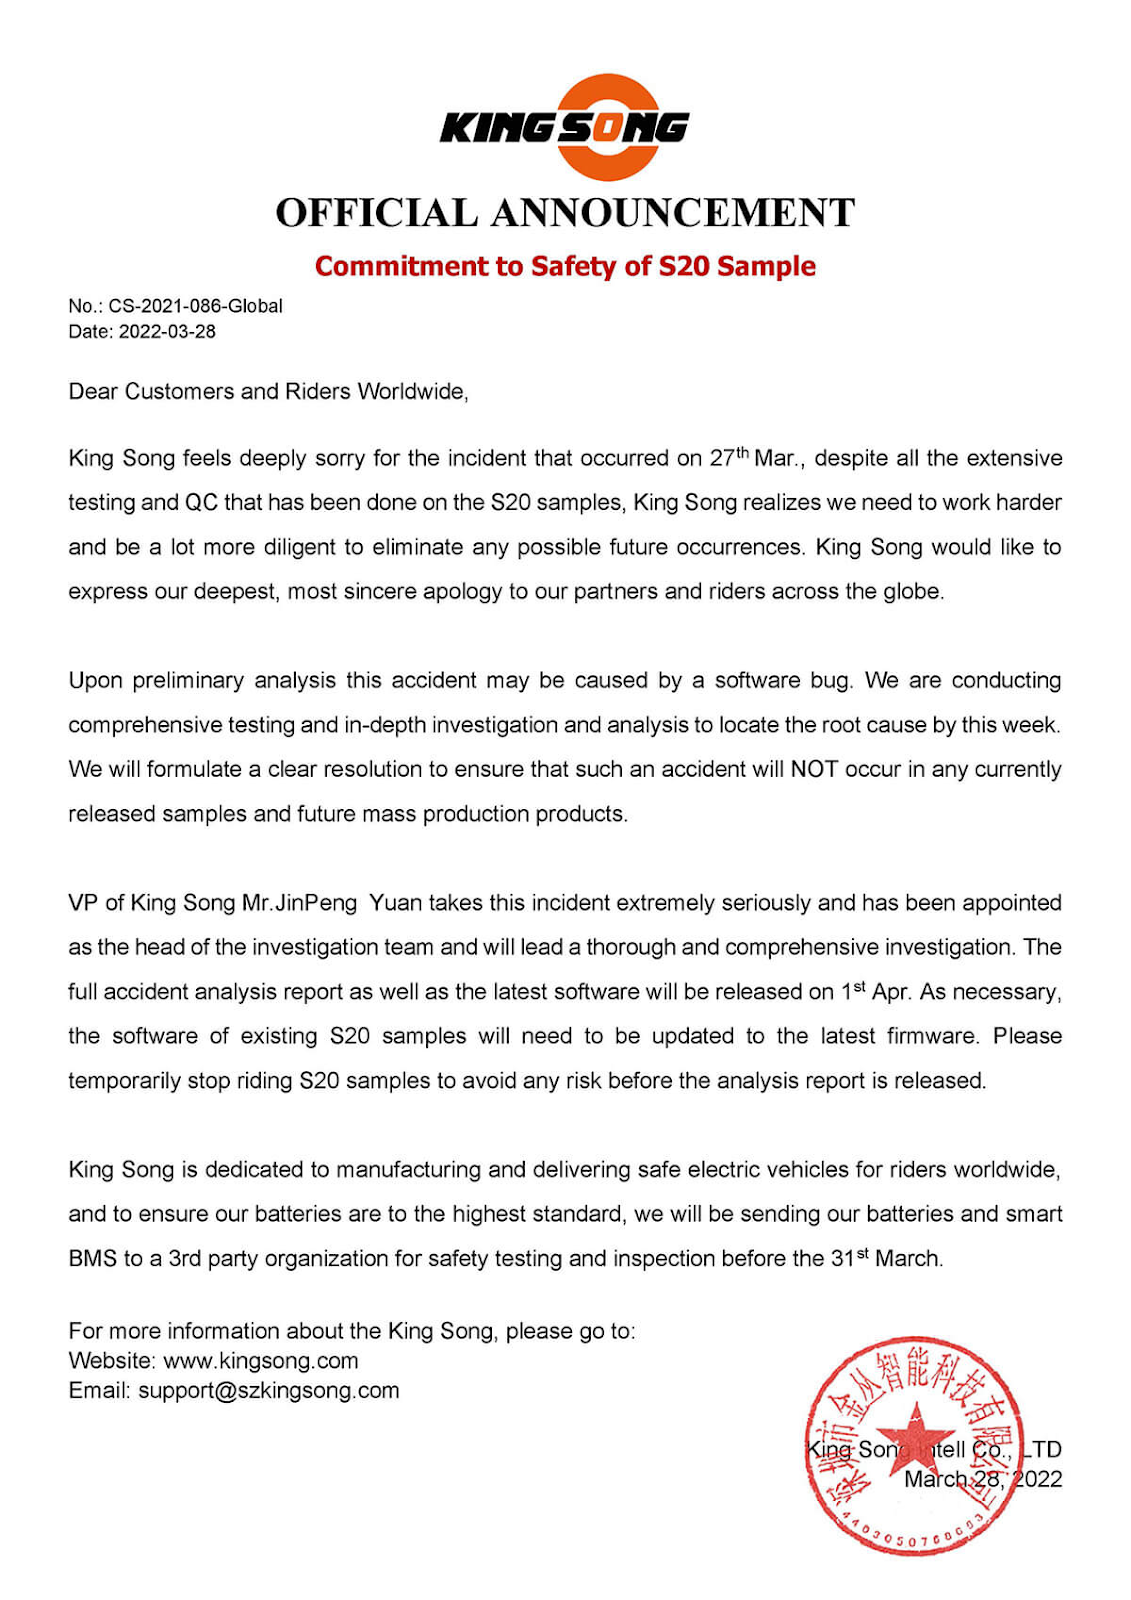 King Song Official Announcement commitment to safety of S20 sample